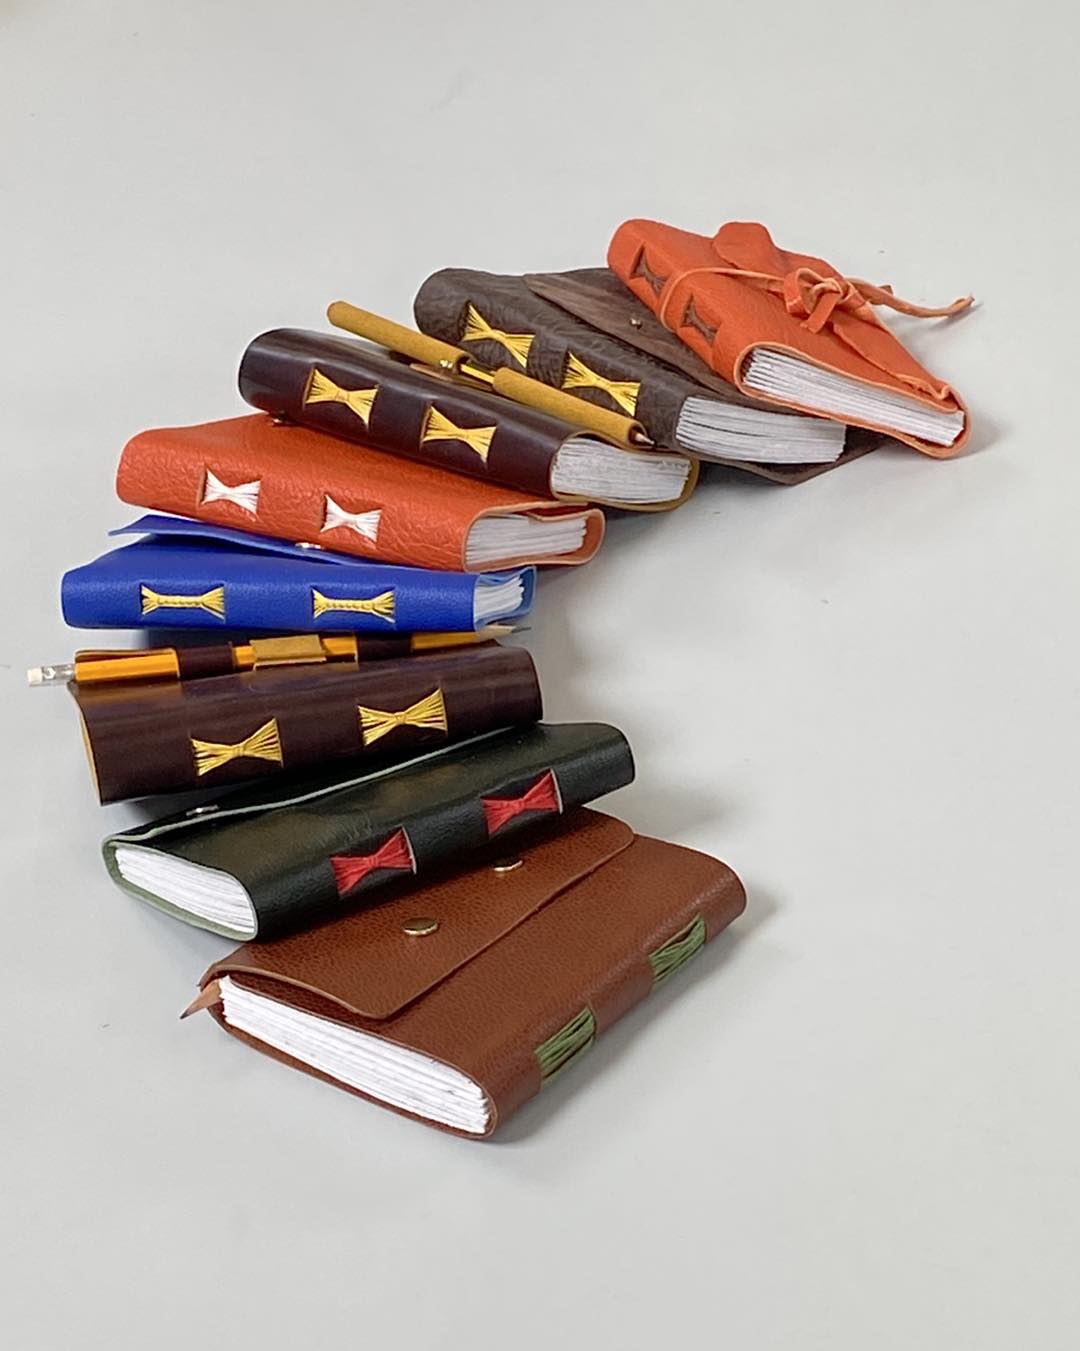 Leather Bound Bookbinding Workshop - Friday 8th December